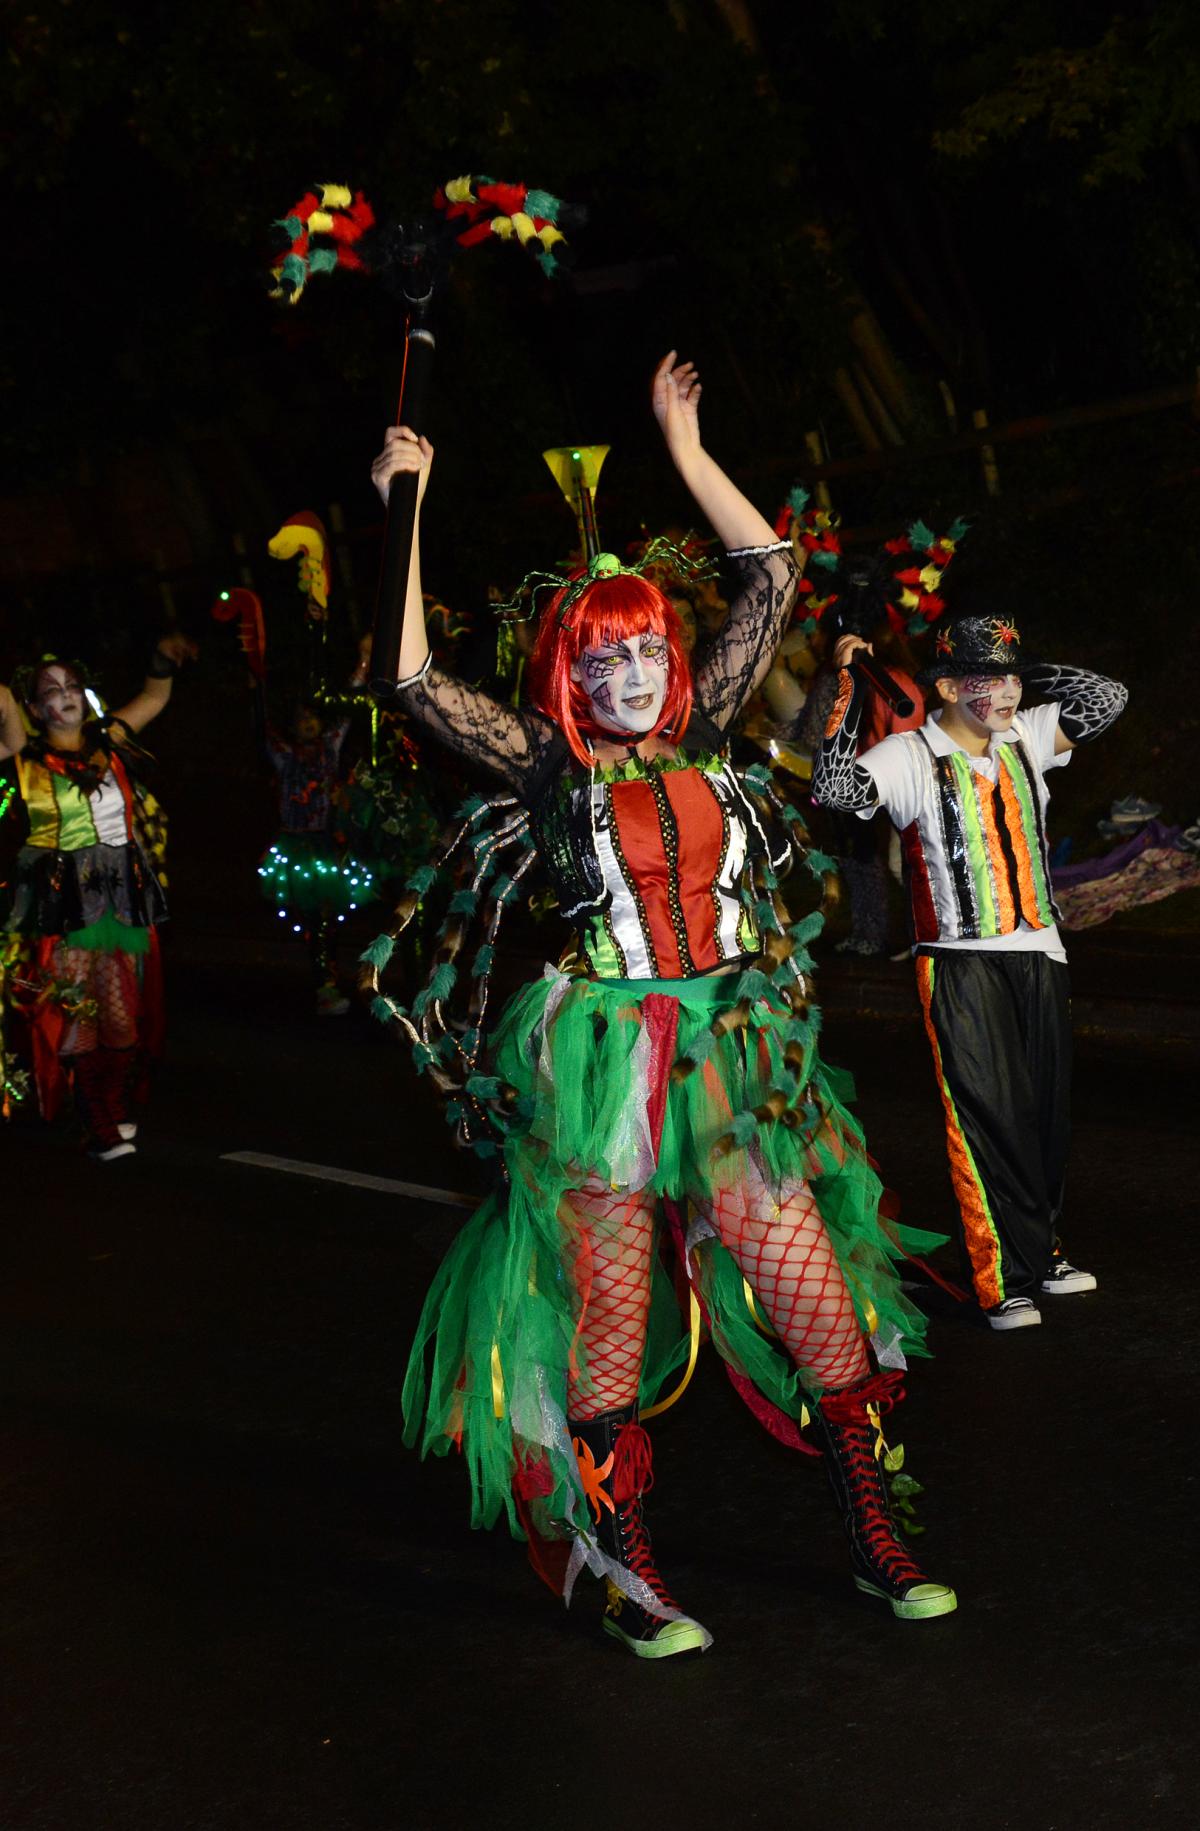 Pictures from Wellington's 2016 Carnival by Ash Magill